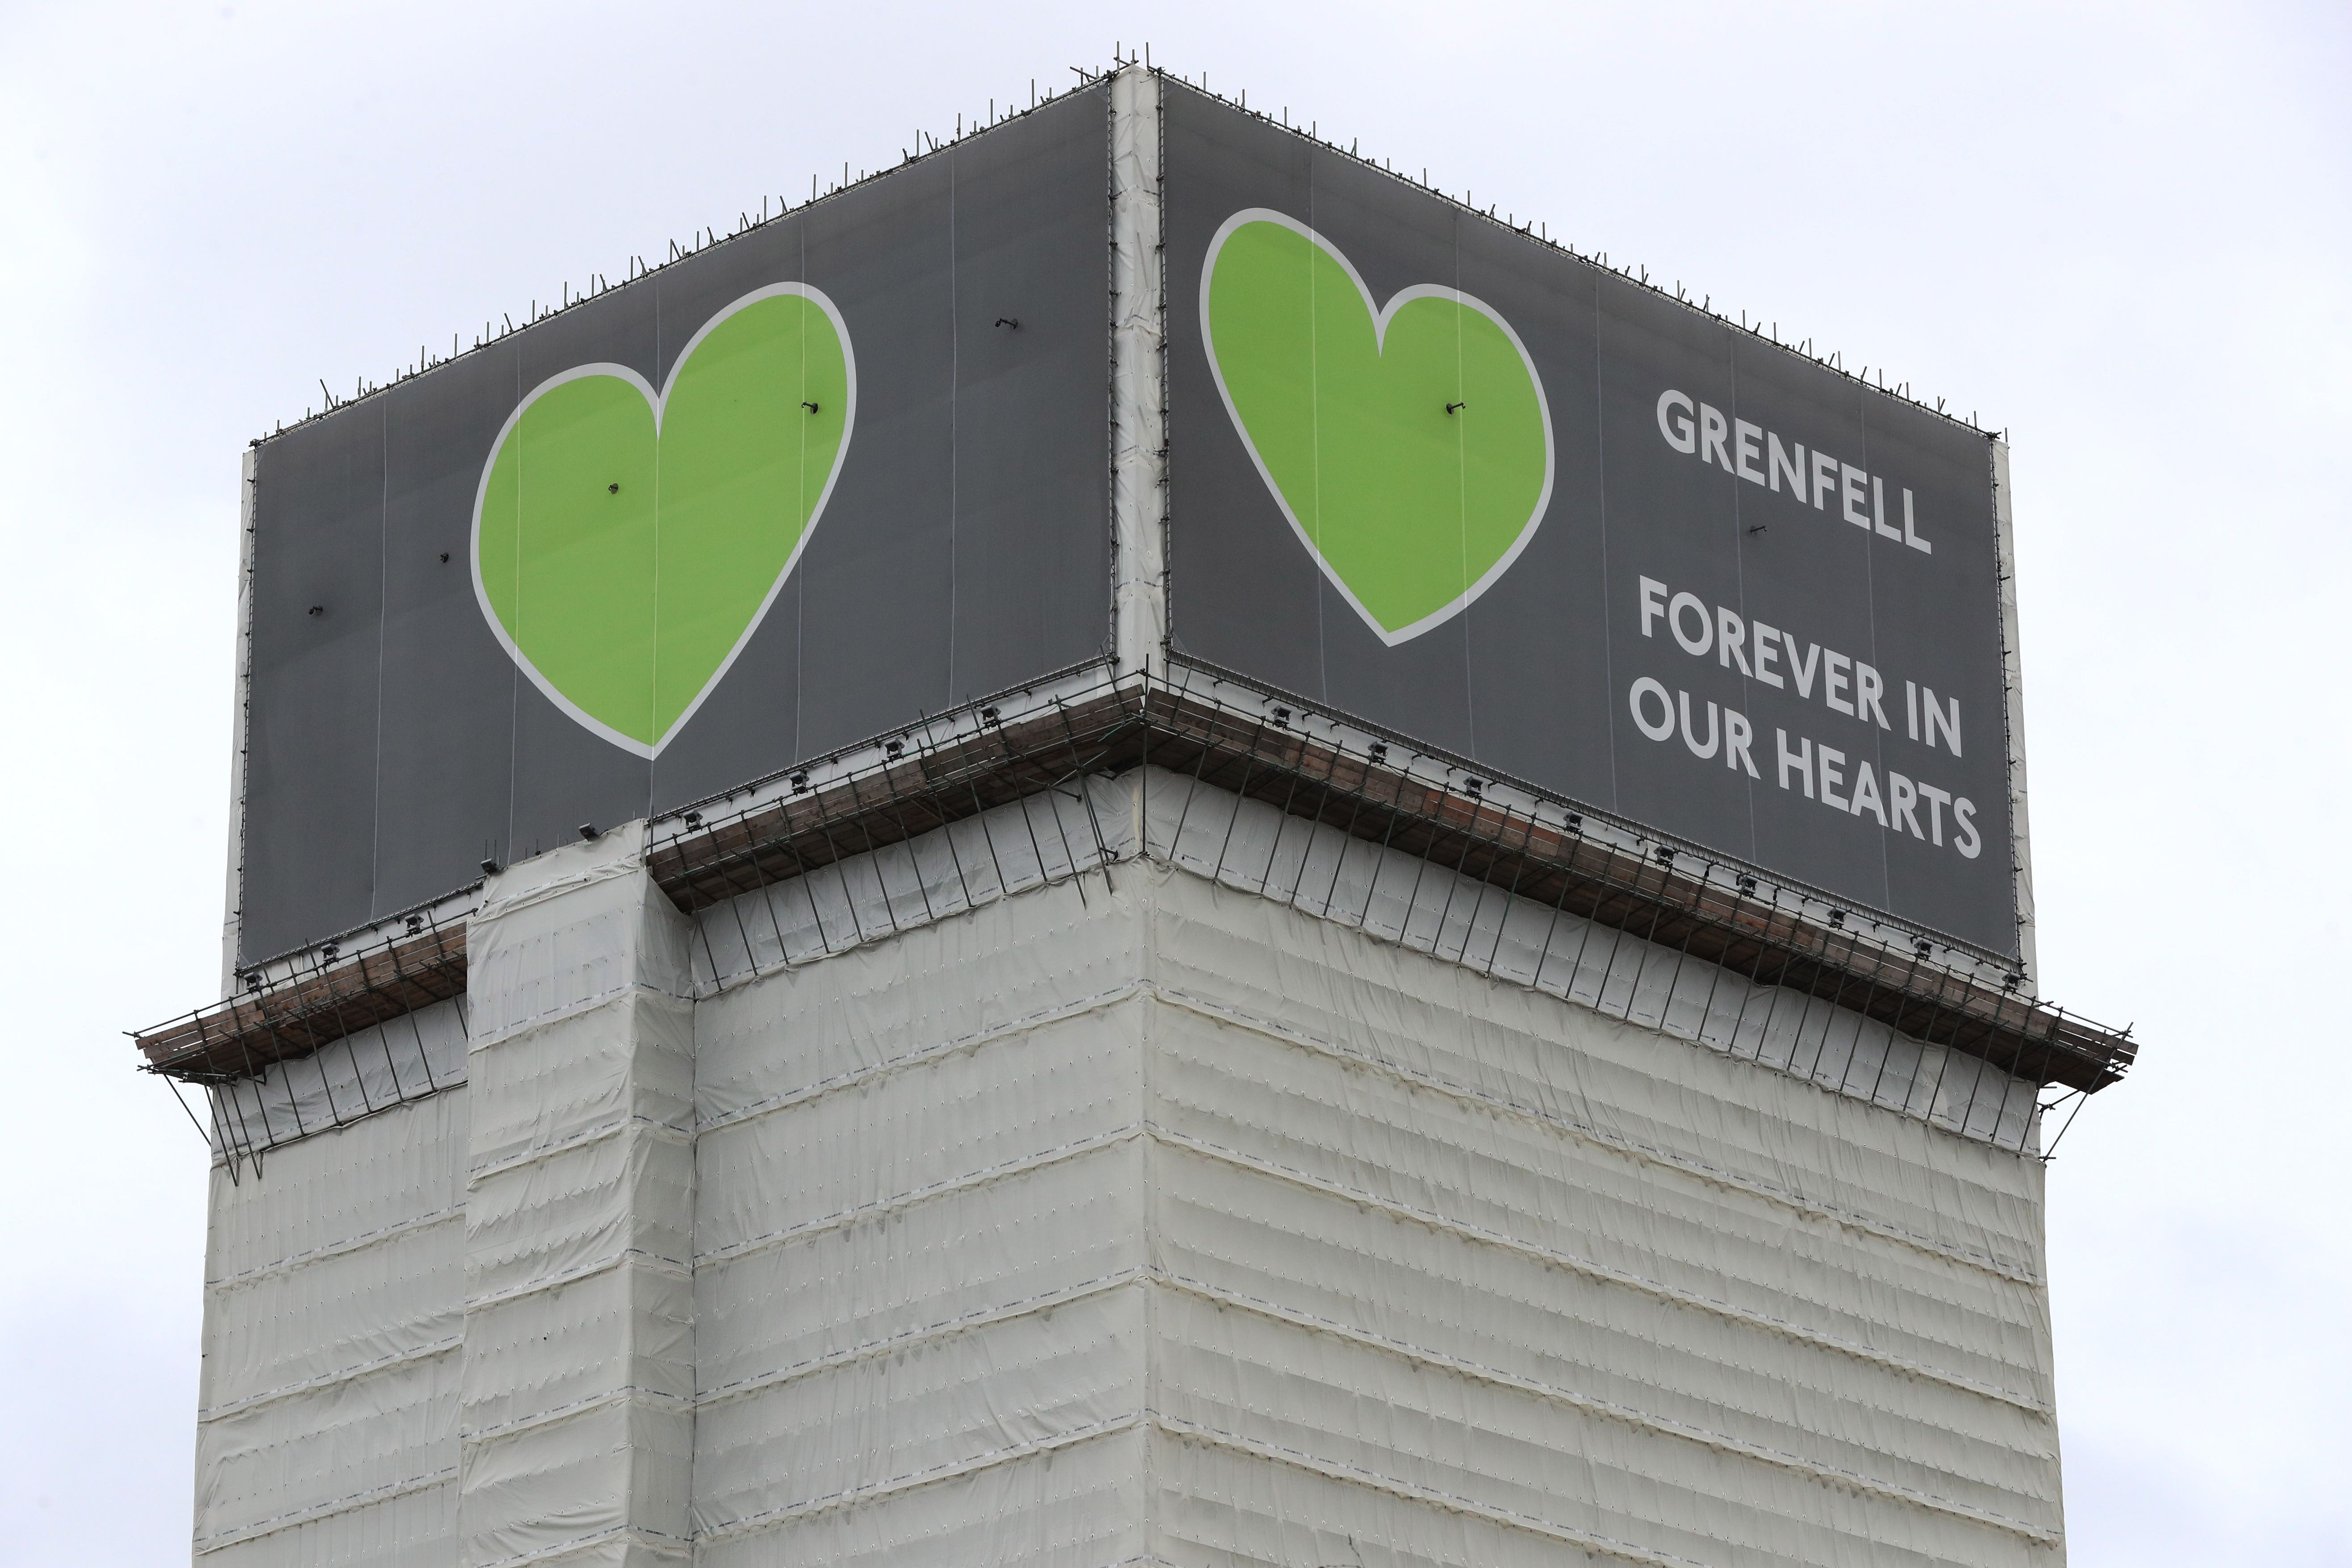 pa ready, prime minister, london, north kensington, grenfell inquiry says final report will not be published before april next year